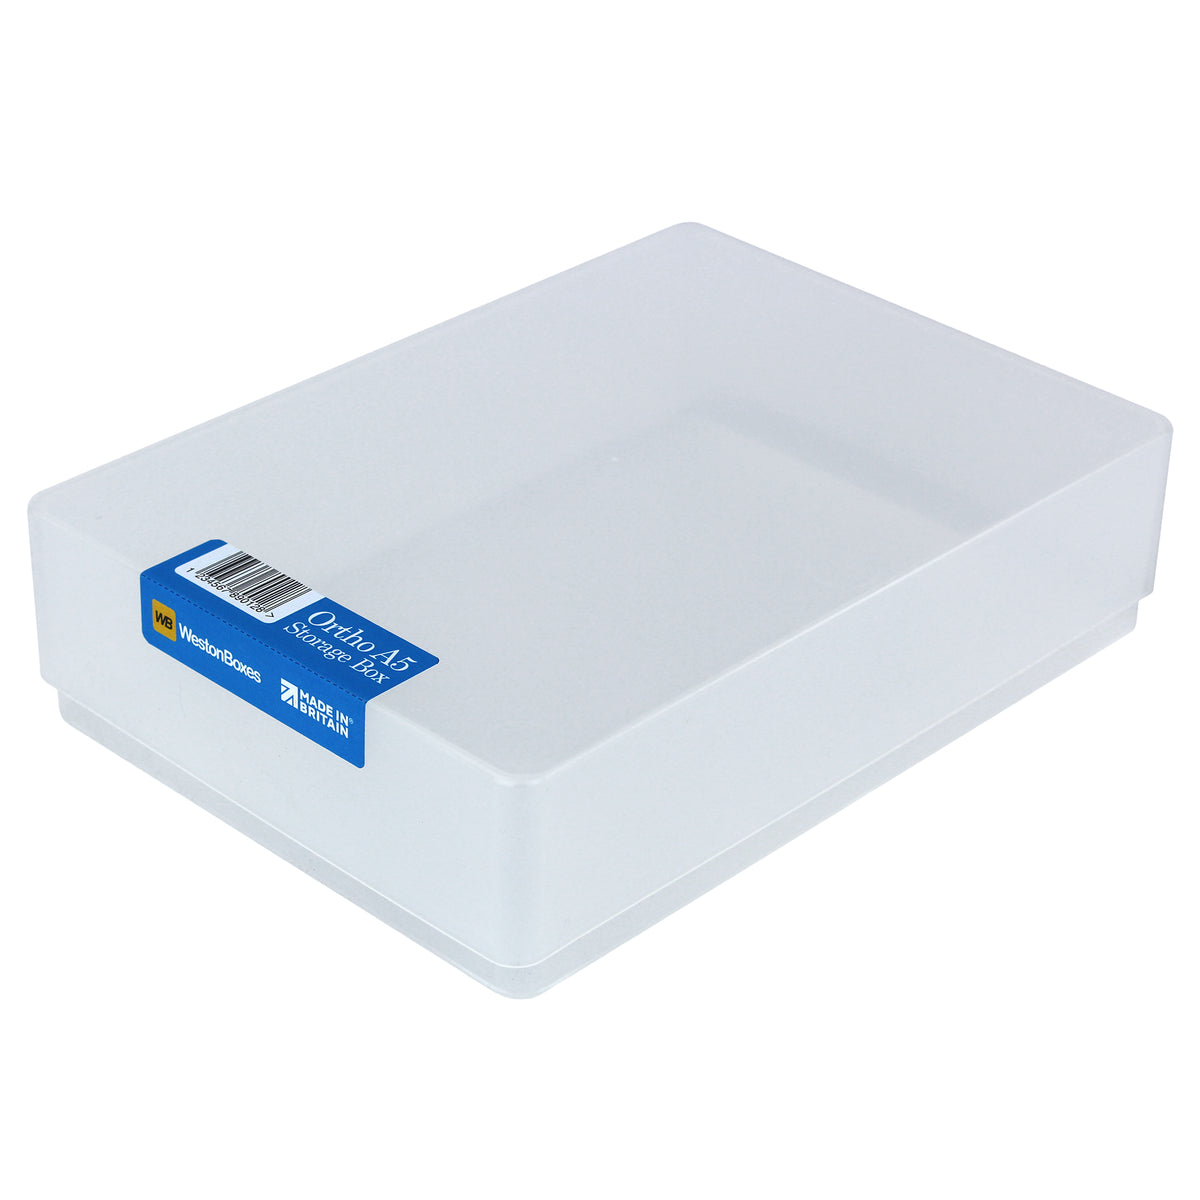 WestonBoxes Compliment Slip / DL Envelope Storage Box - Made in Britain